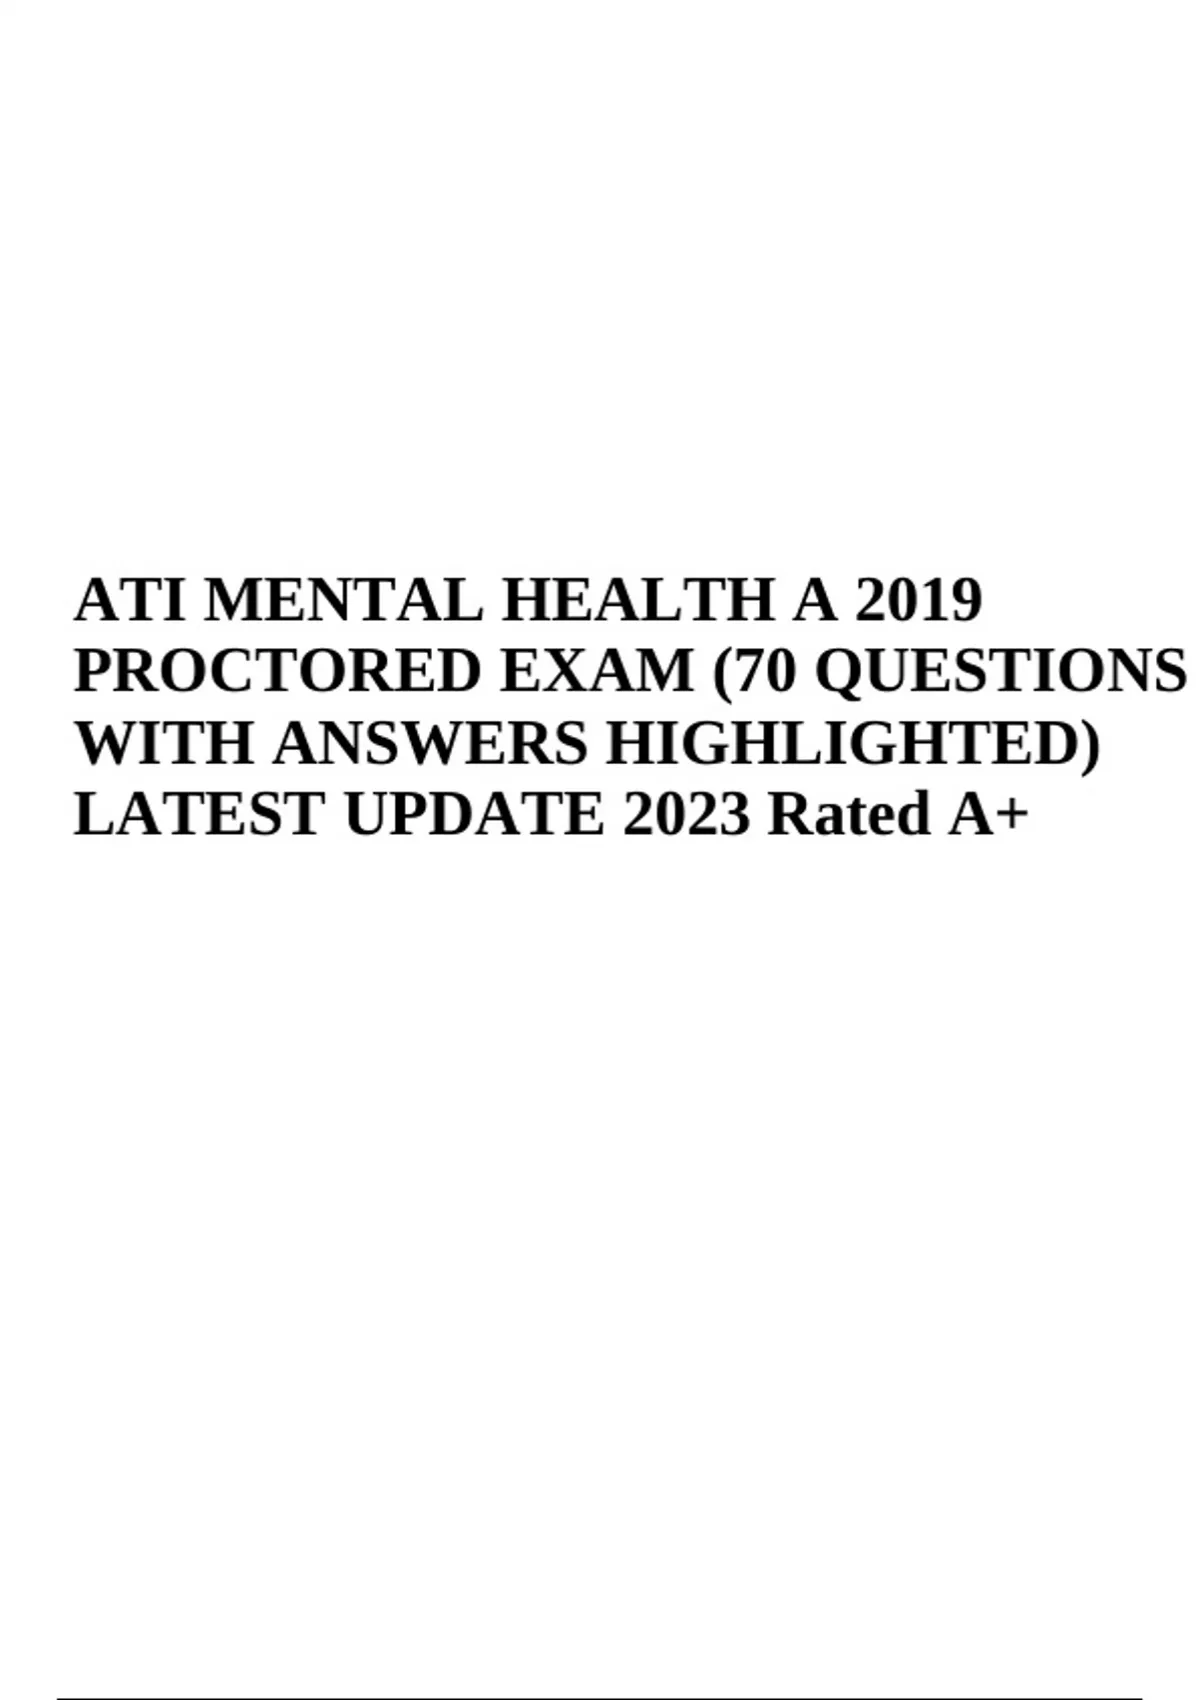 ATI MENTAL HEALTH PROCTORED EXAM A 2019 70 QUESTIONS WITH ANSWERS